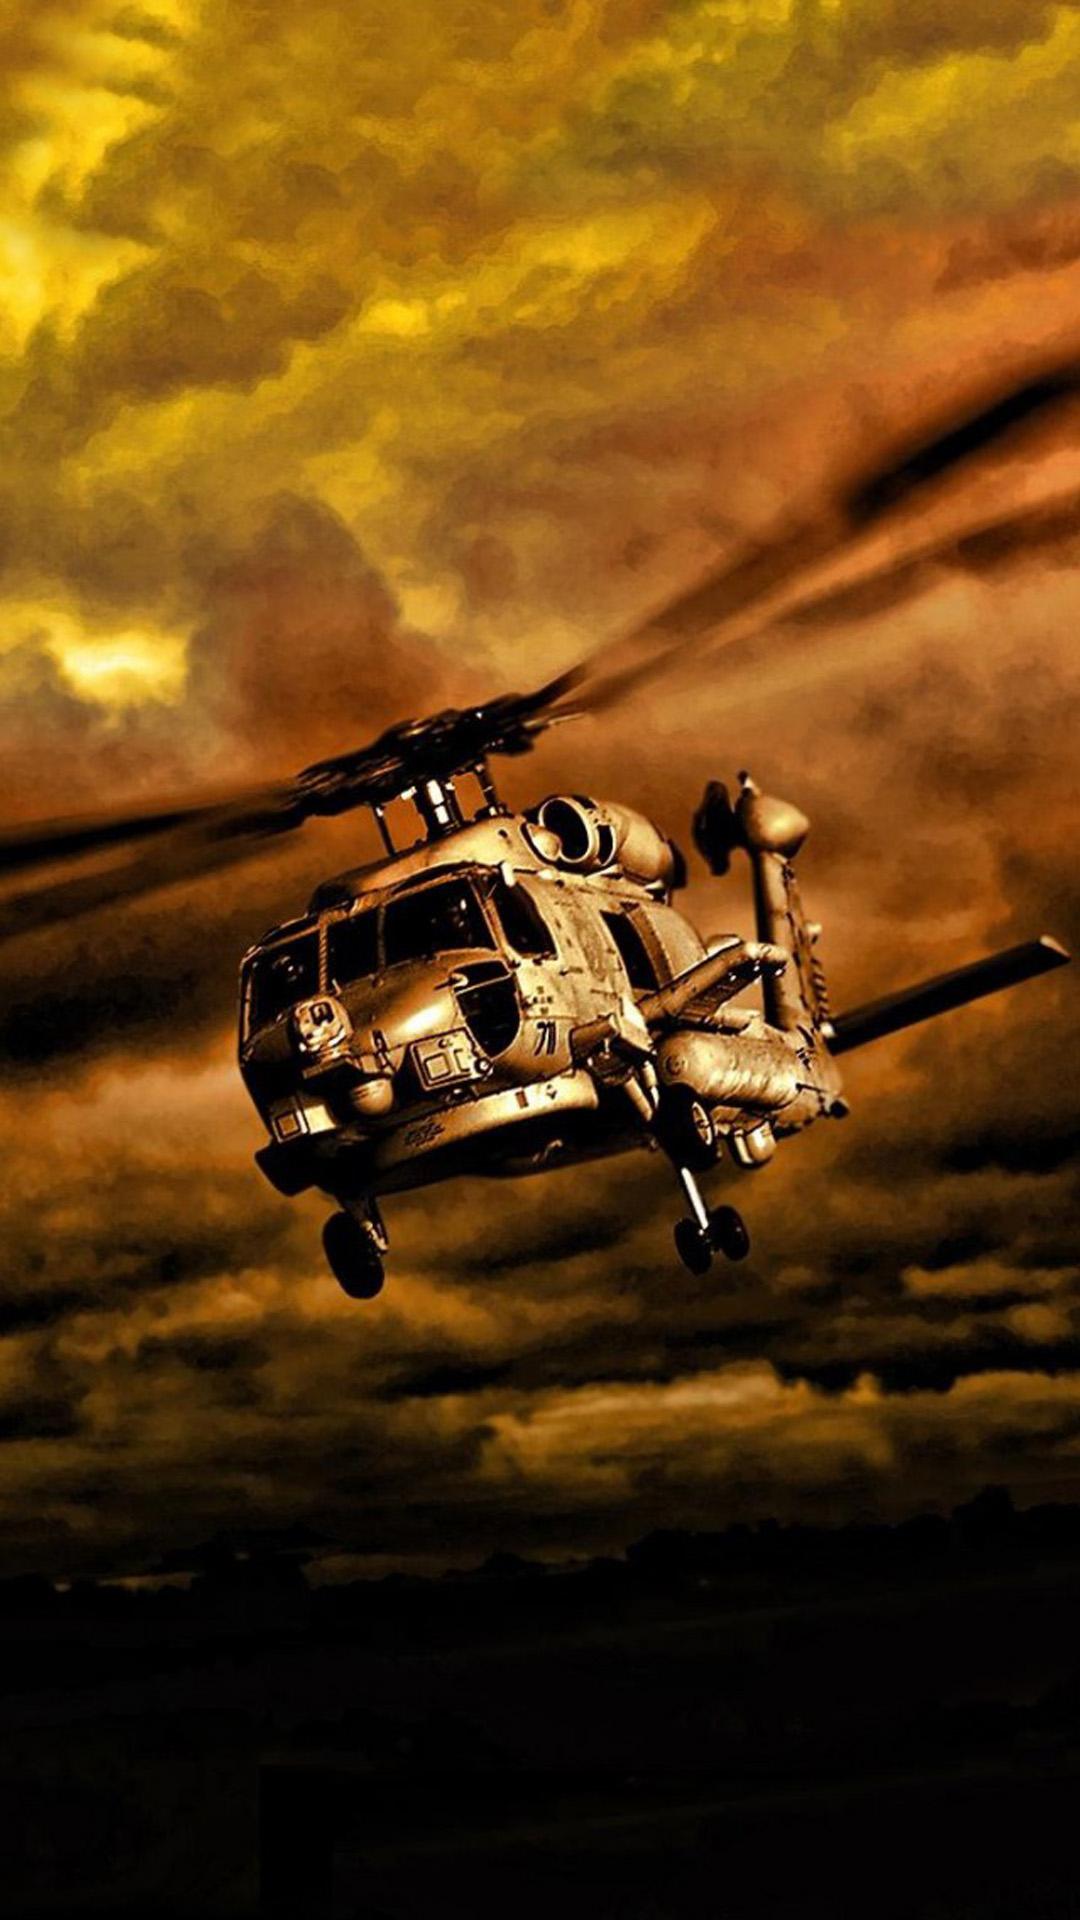 War Helicopters In Cloudy Sky iPhone 8 Wallpaper Free Download